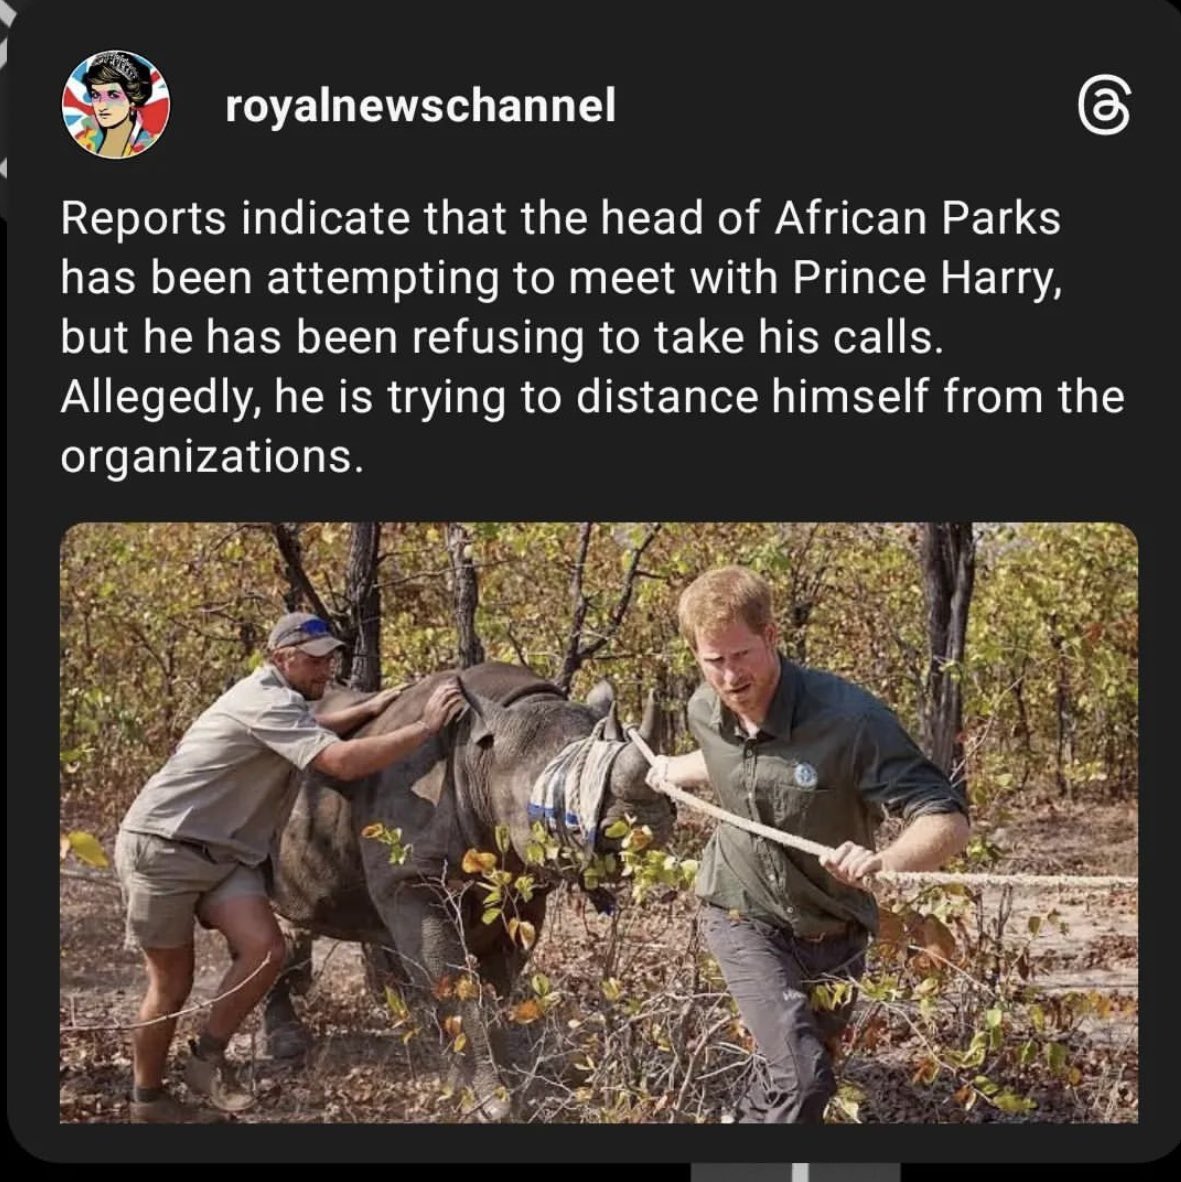 If this is true, it is so disturbing. What happened to the Archewell motto, “show up, do good?” Apparently now it’s “don’t answer the phone, distance during difficulty.” Harry is SUCH a douche. #AfricanParks